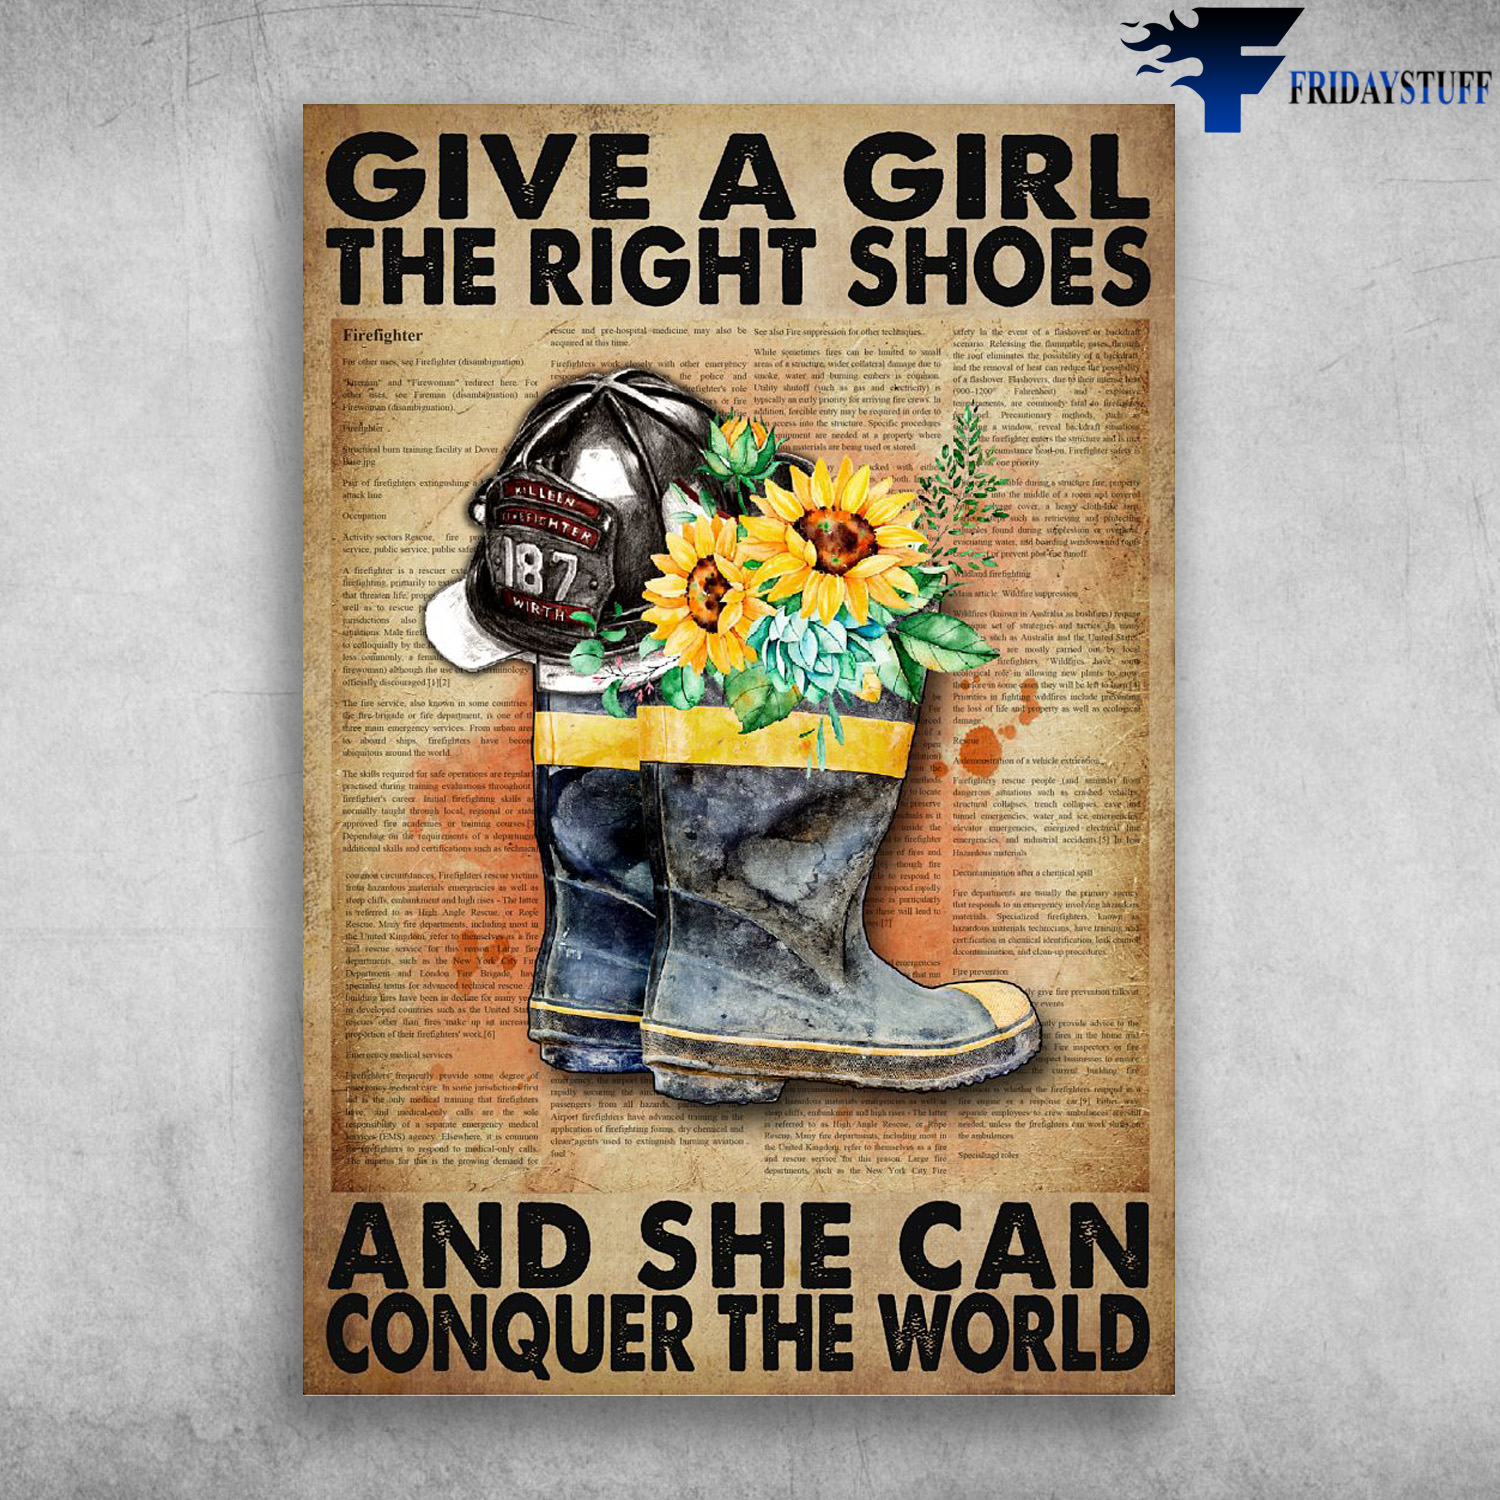 Firefighter Shoe - Give A Girl The Right Shoes, And She Can Conquer The World